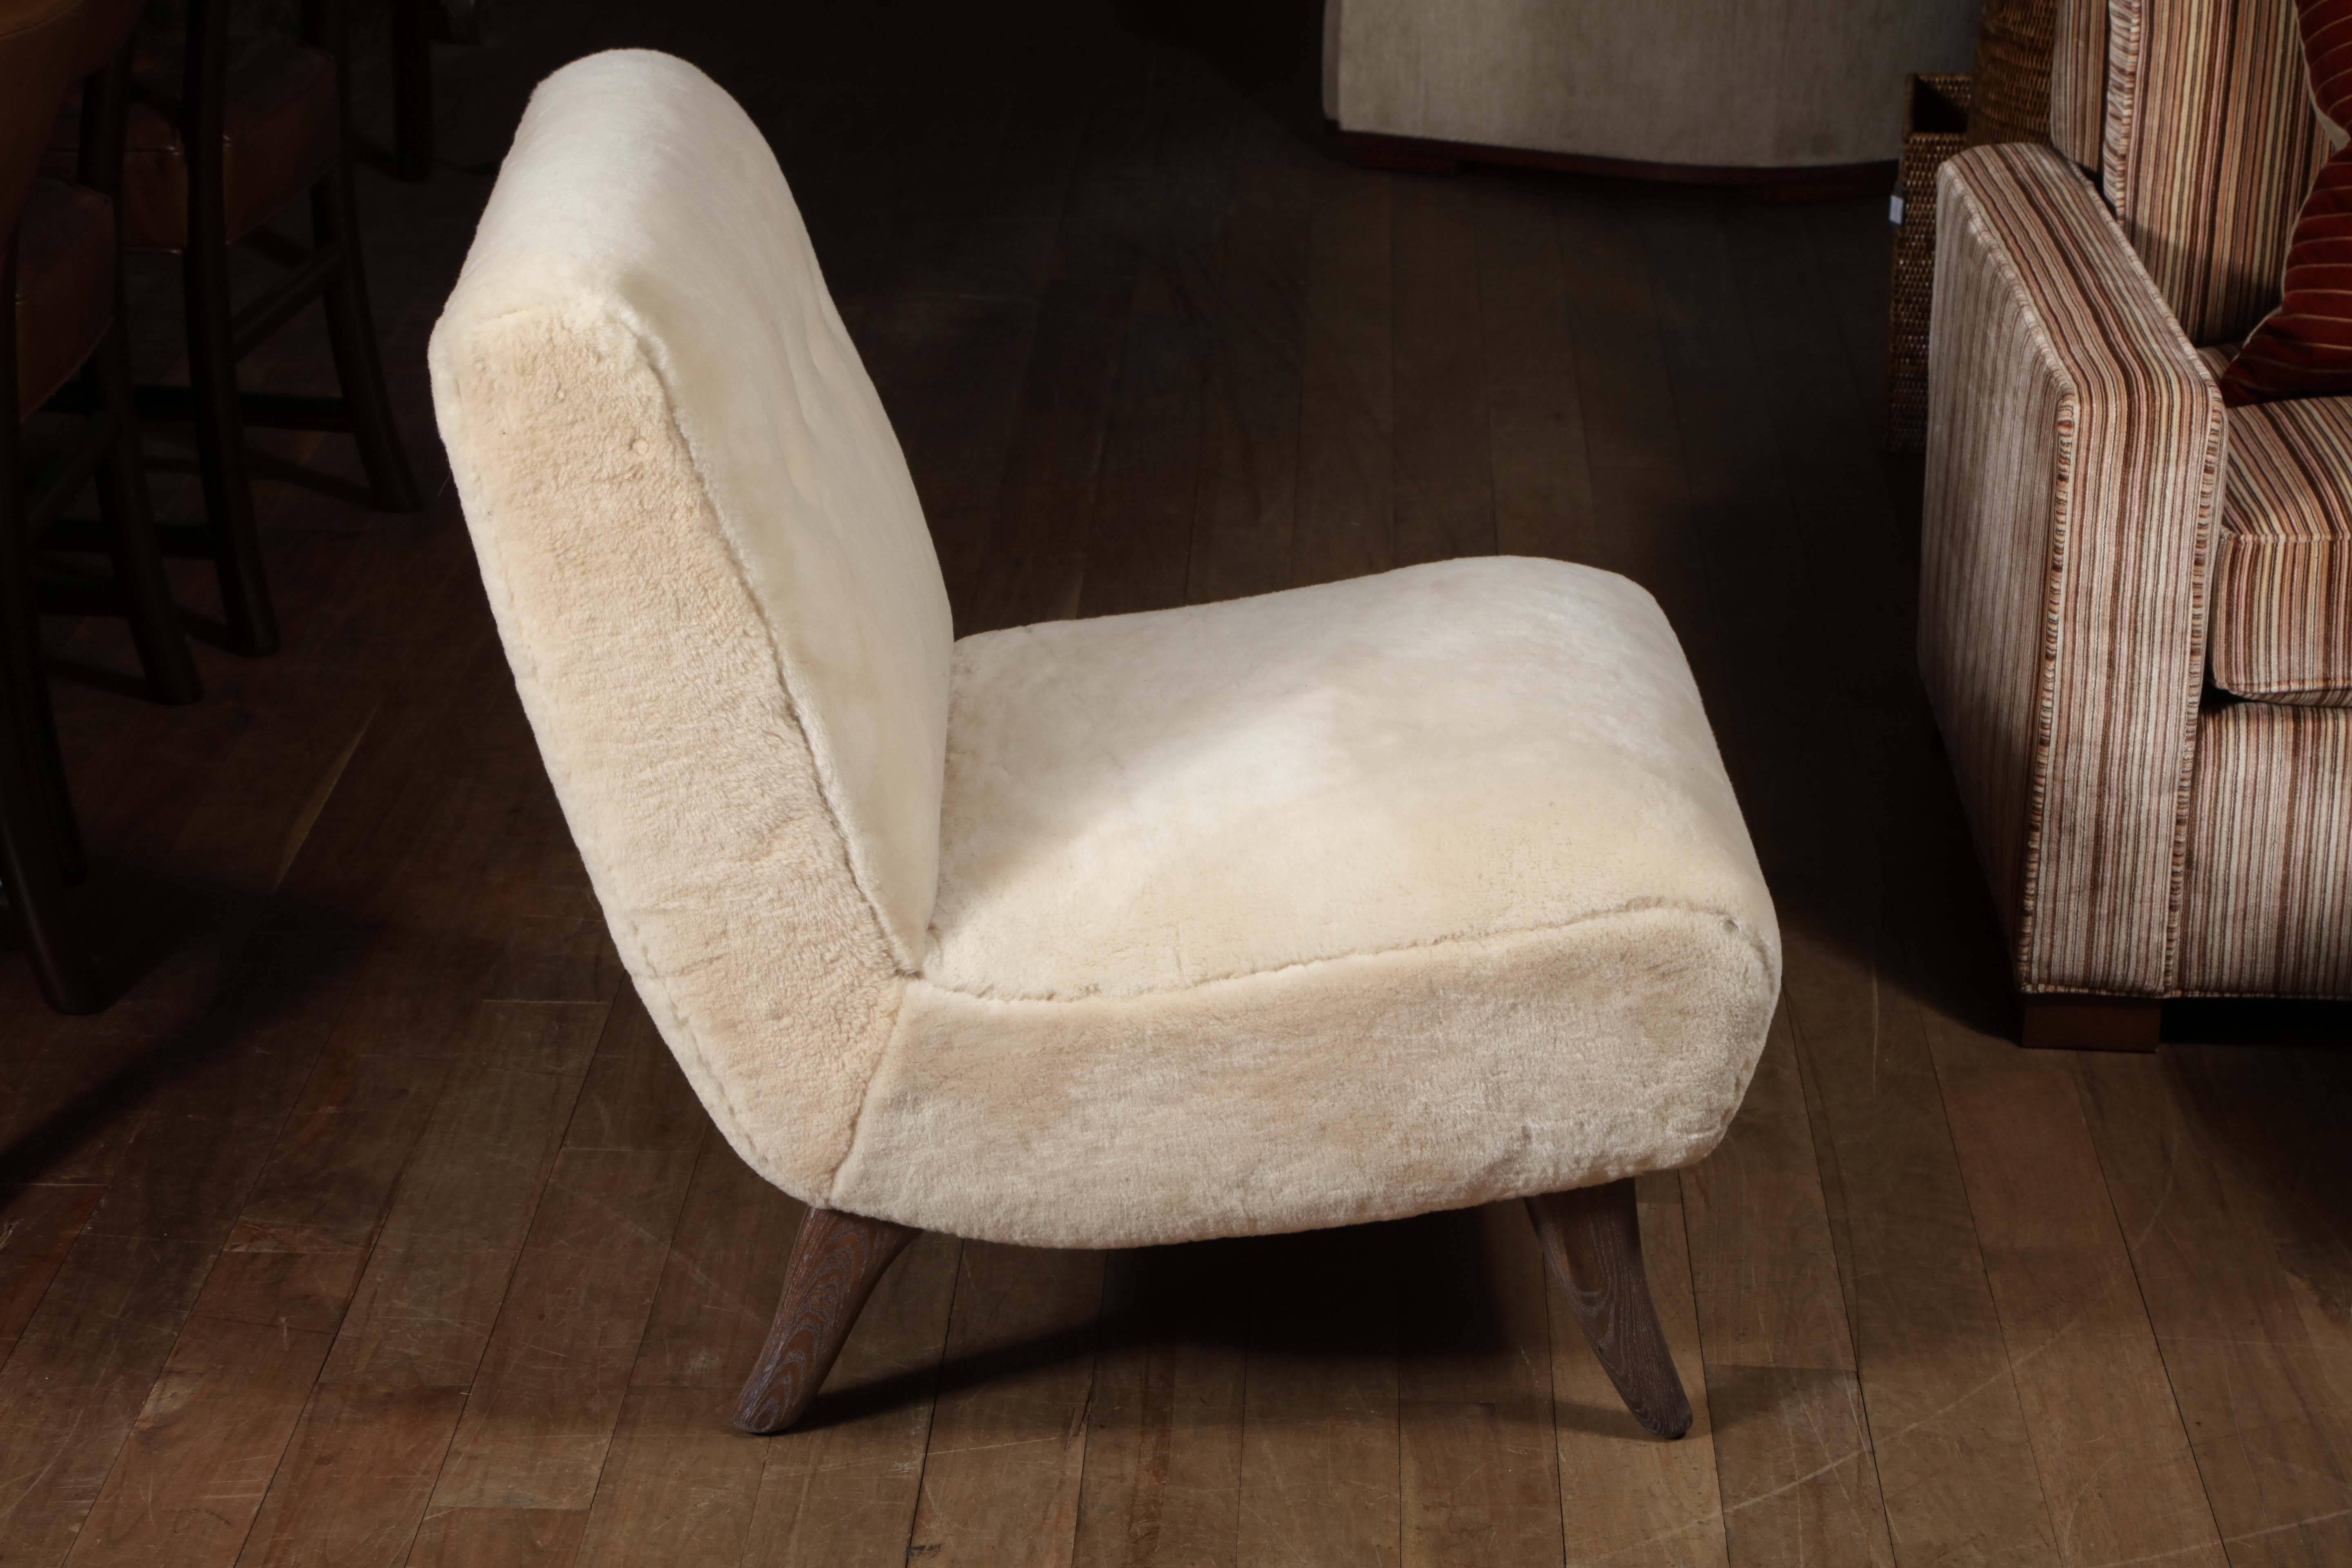 Pair of shearling upholstered slipper chairs with bone leather buttons and cerused oak feet, circa 1950.